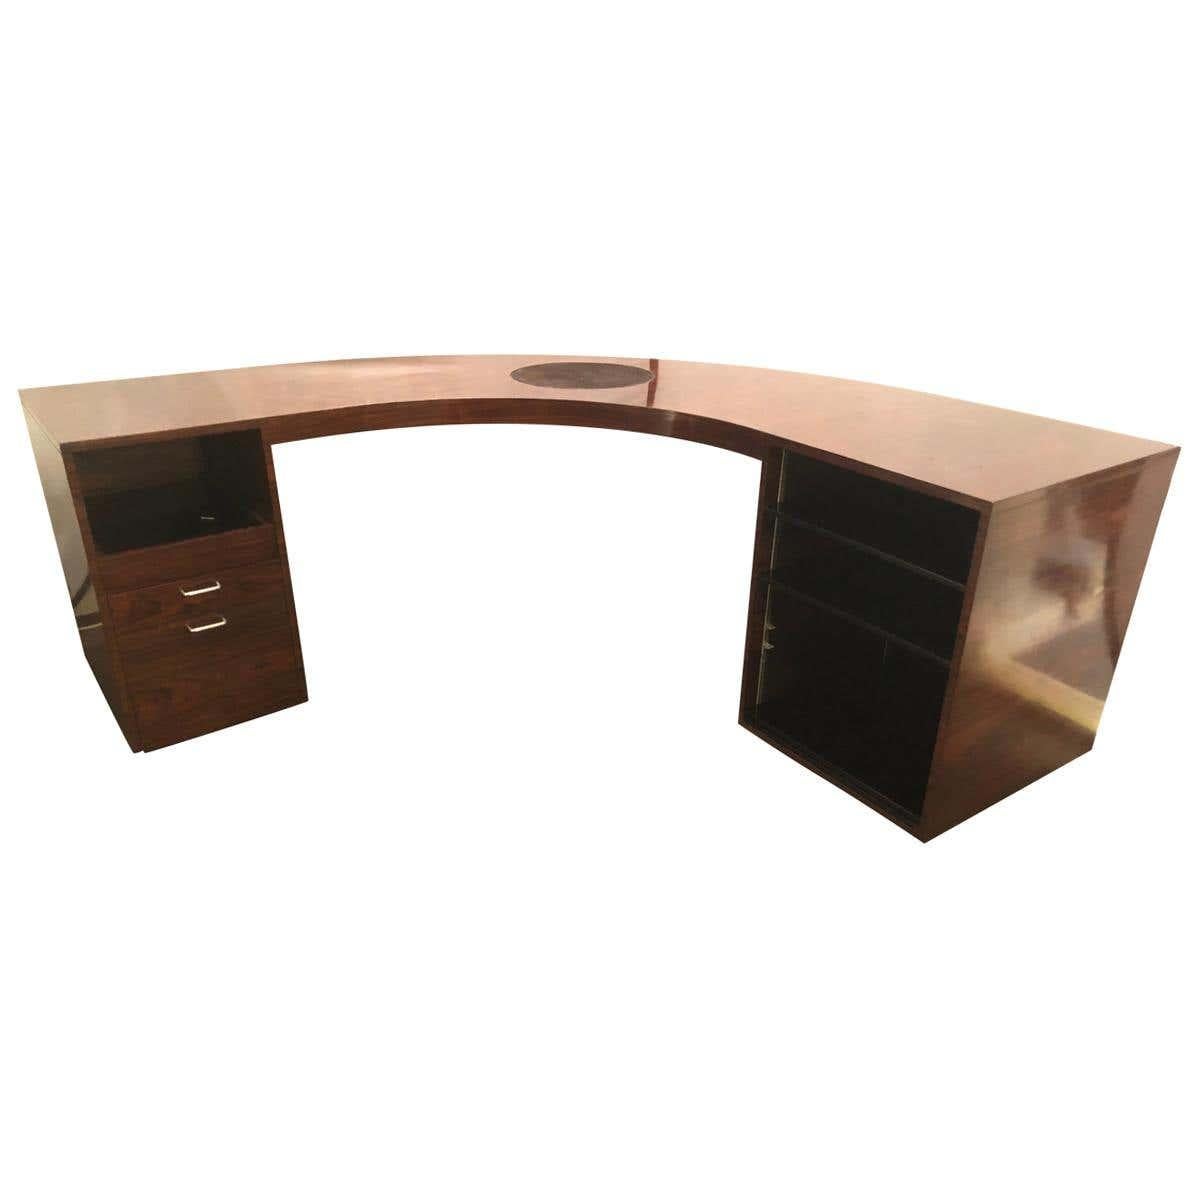 This custom quality rosewood demilune Mid-Century Modern jewelers or large office desk is spectacular. This simply stunning demilune desk is not only palatial in size but stature as well. The fully hand rubbed French polished desk has a large